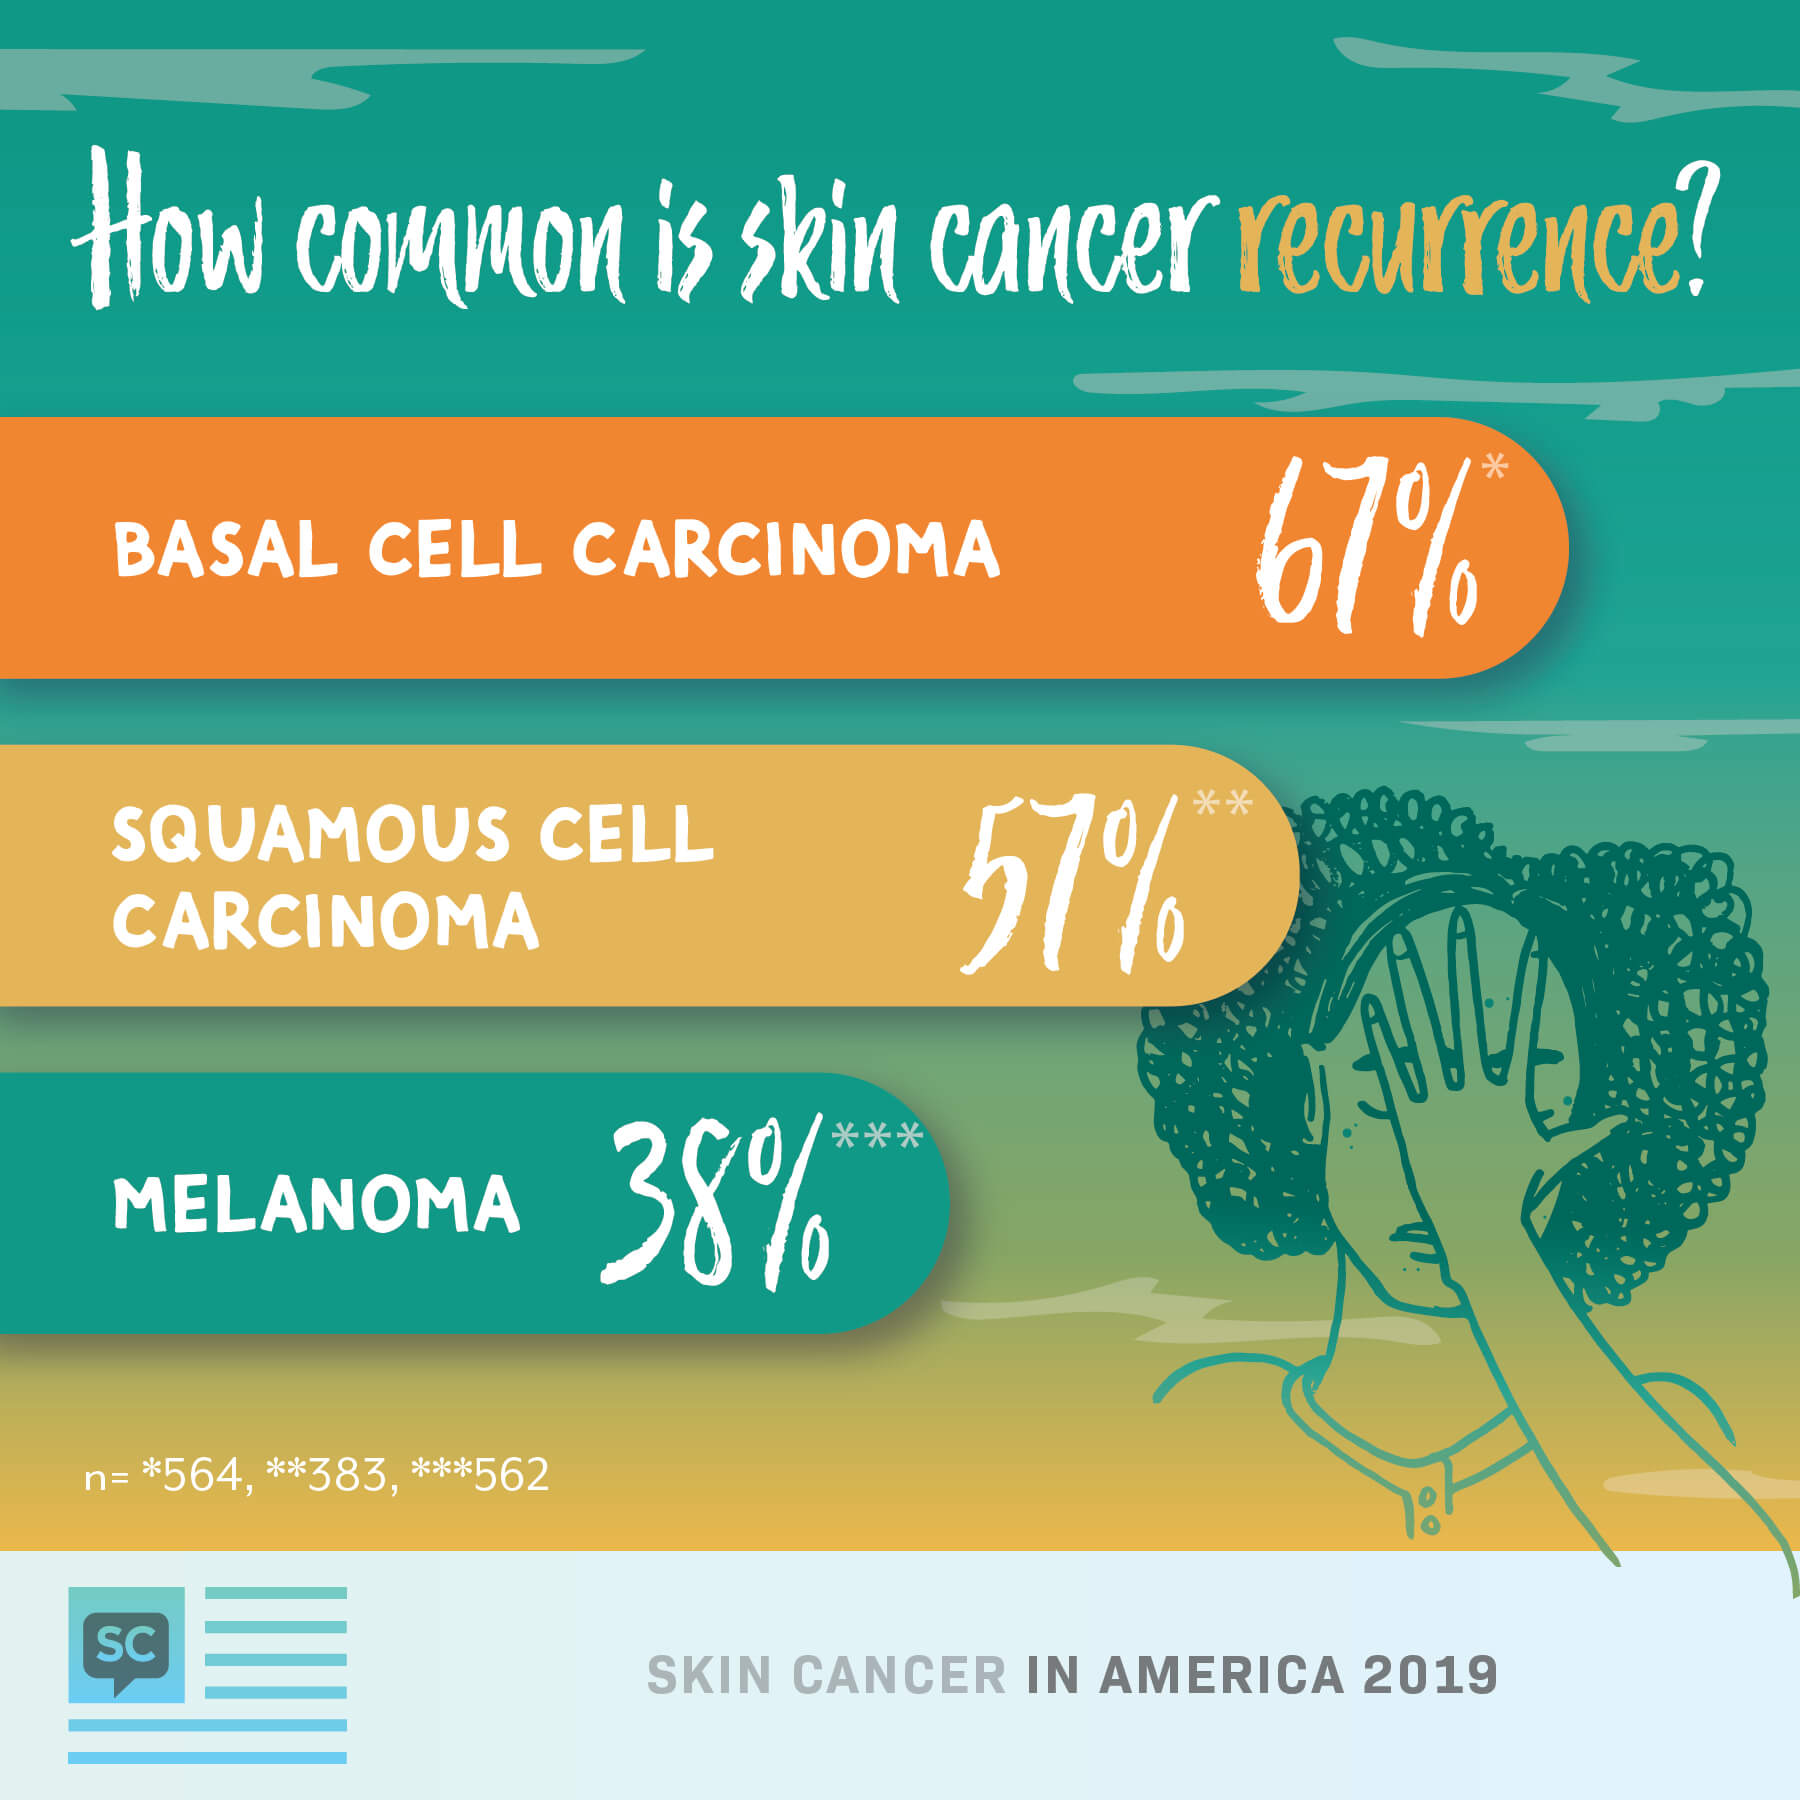 Skin cancer recurrence by type: basal cell carcinoma (67%) squamous cell (57%) melanoma (38%)